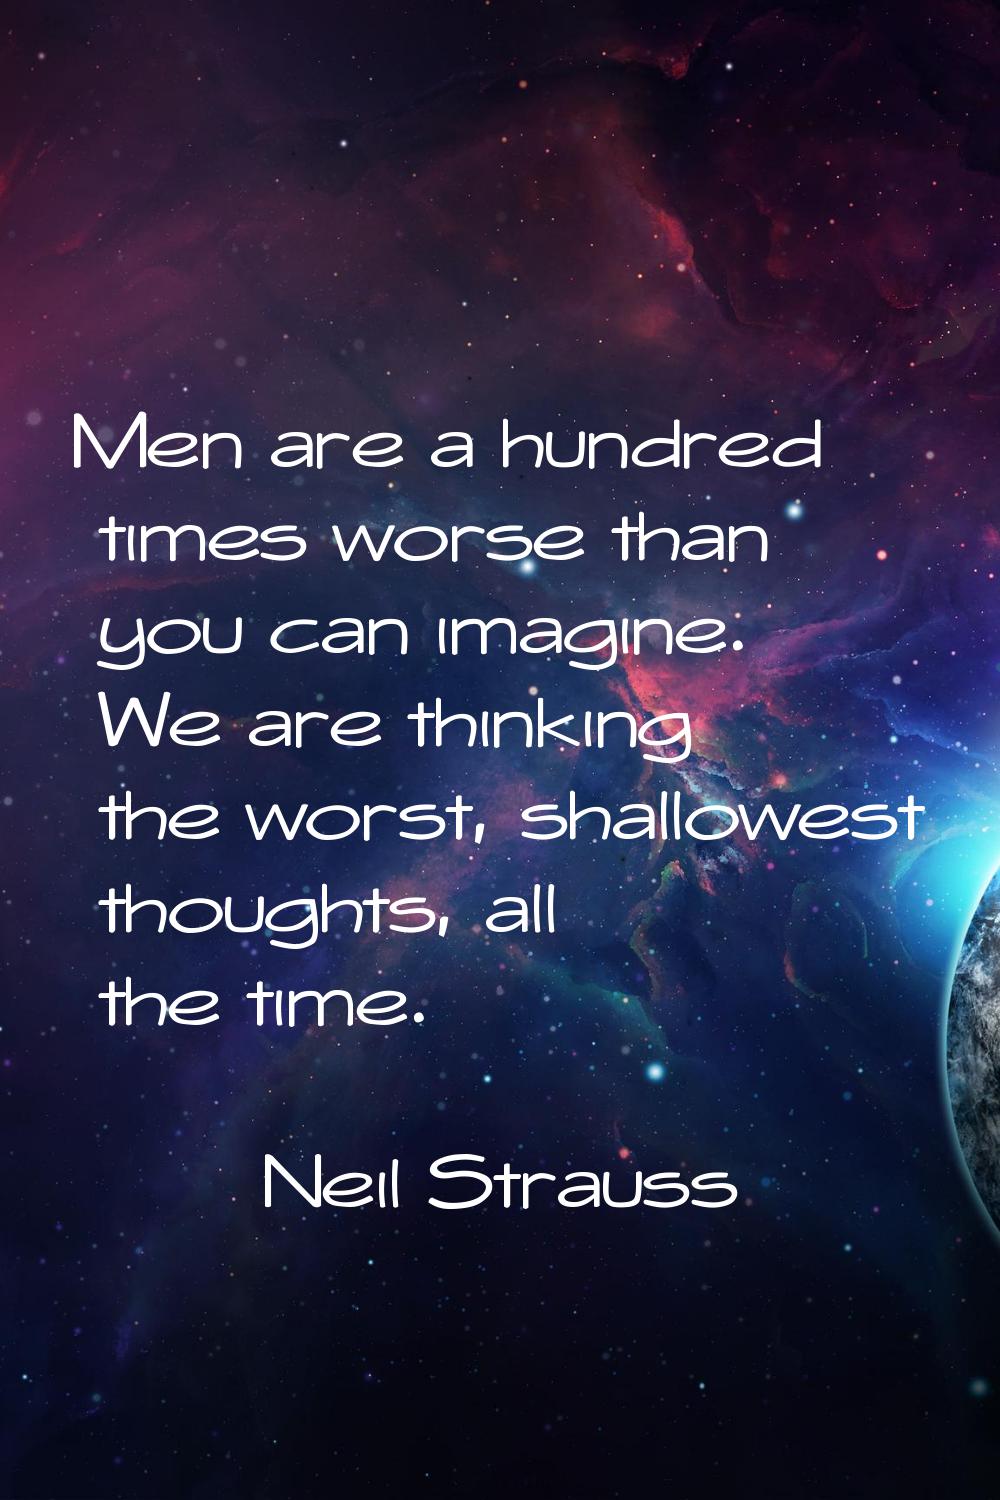 Men are a hundred times worse than you can imagine. We are thinking the worst, shallowest thoughts,